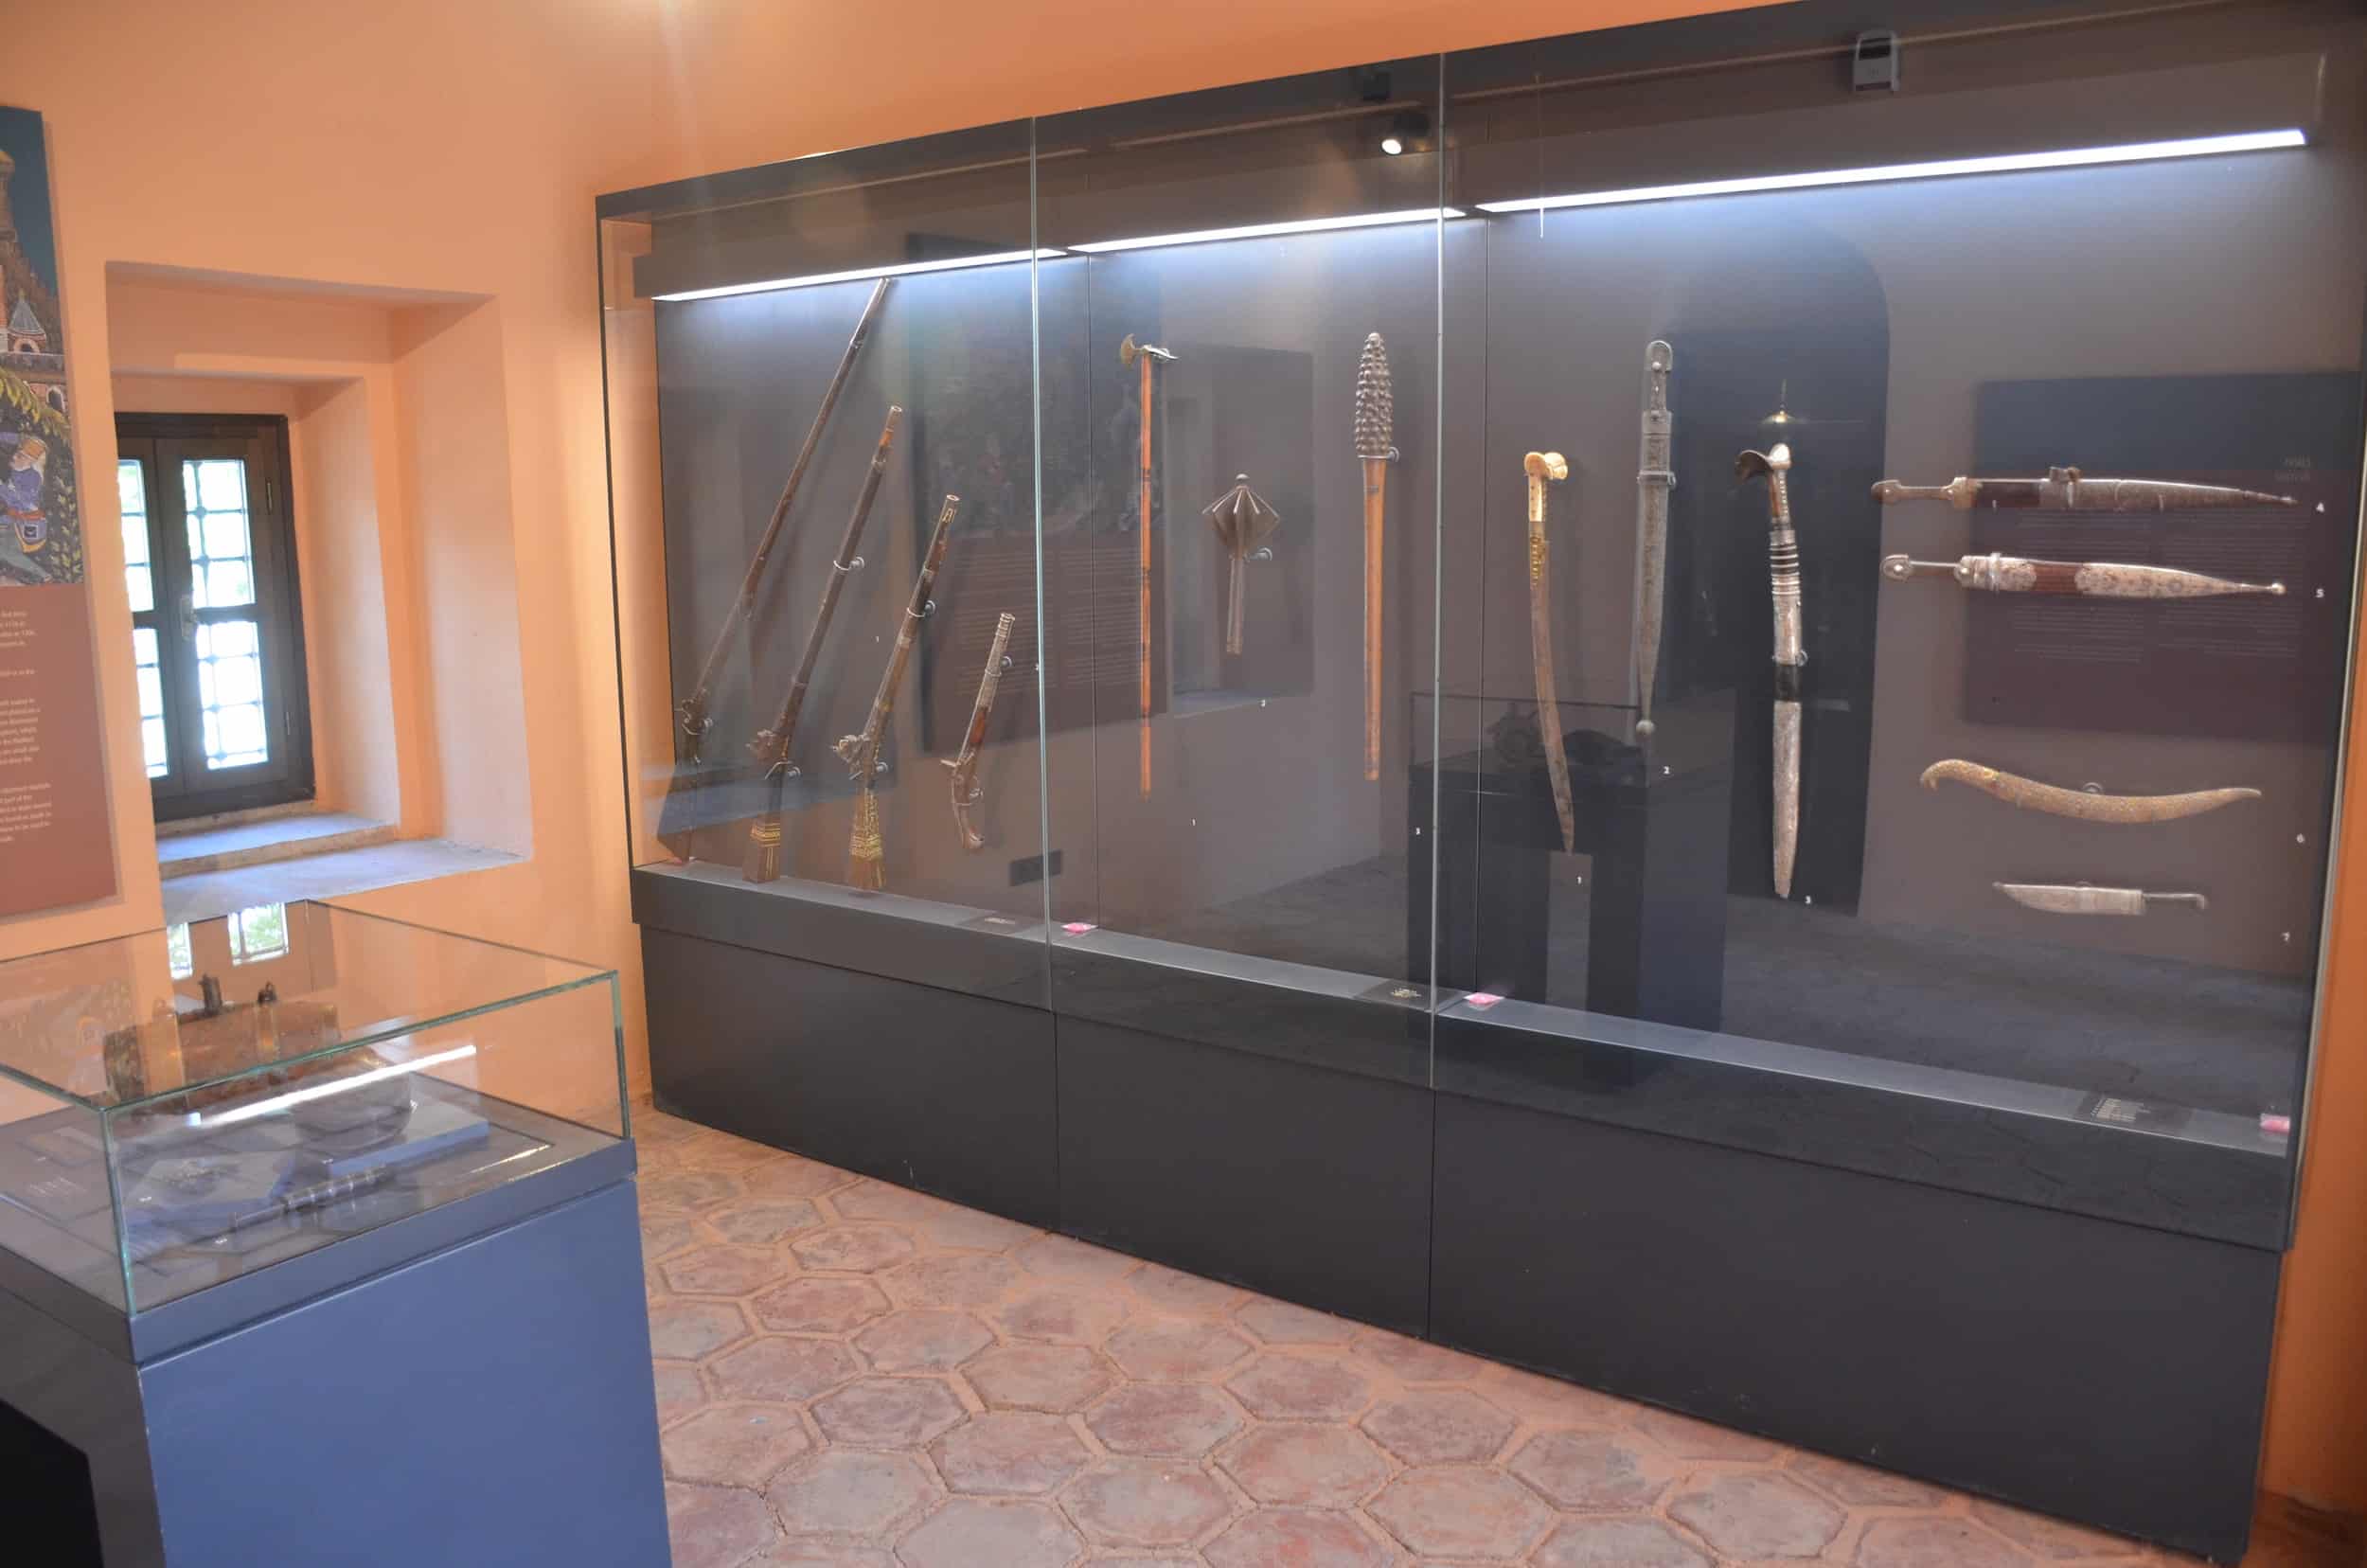 Weapons at the Bursa Museum of Turkish and Islamic Arts